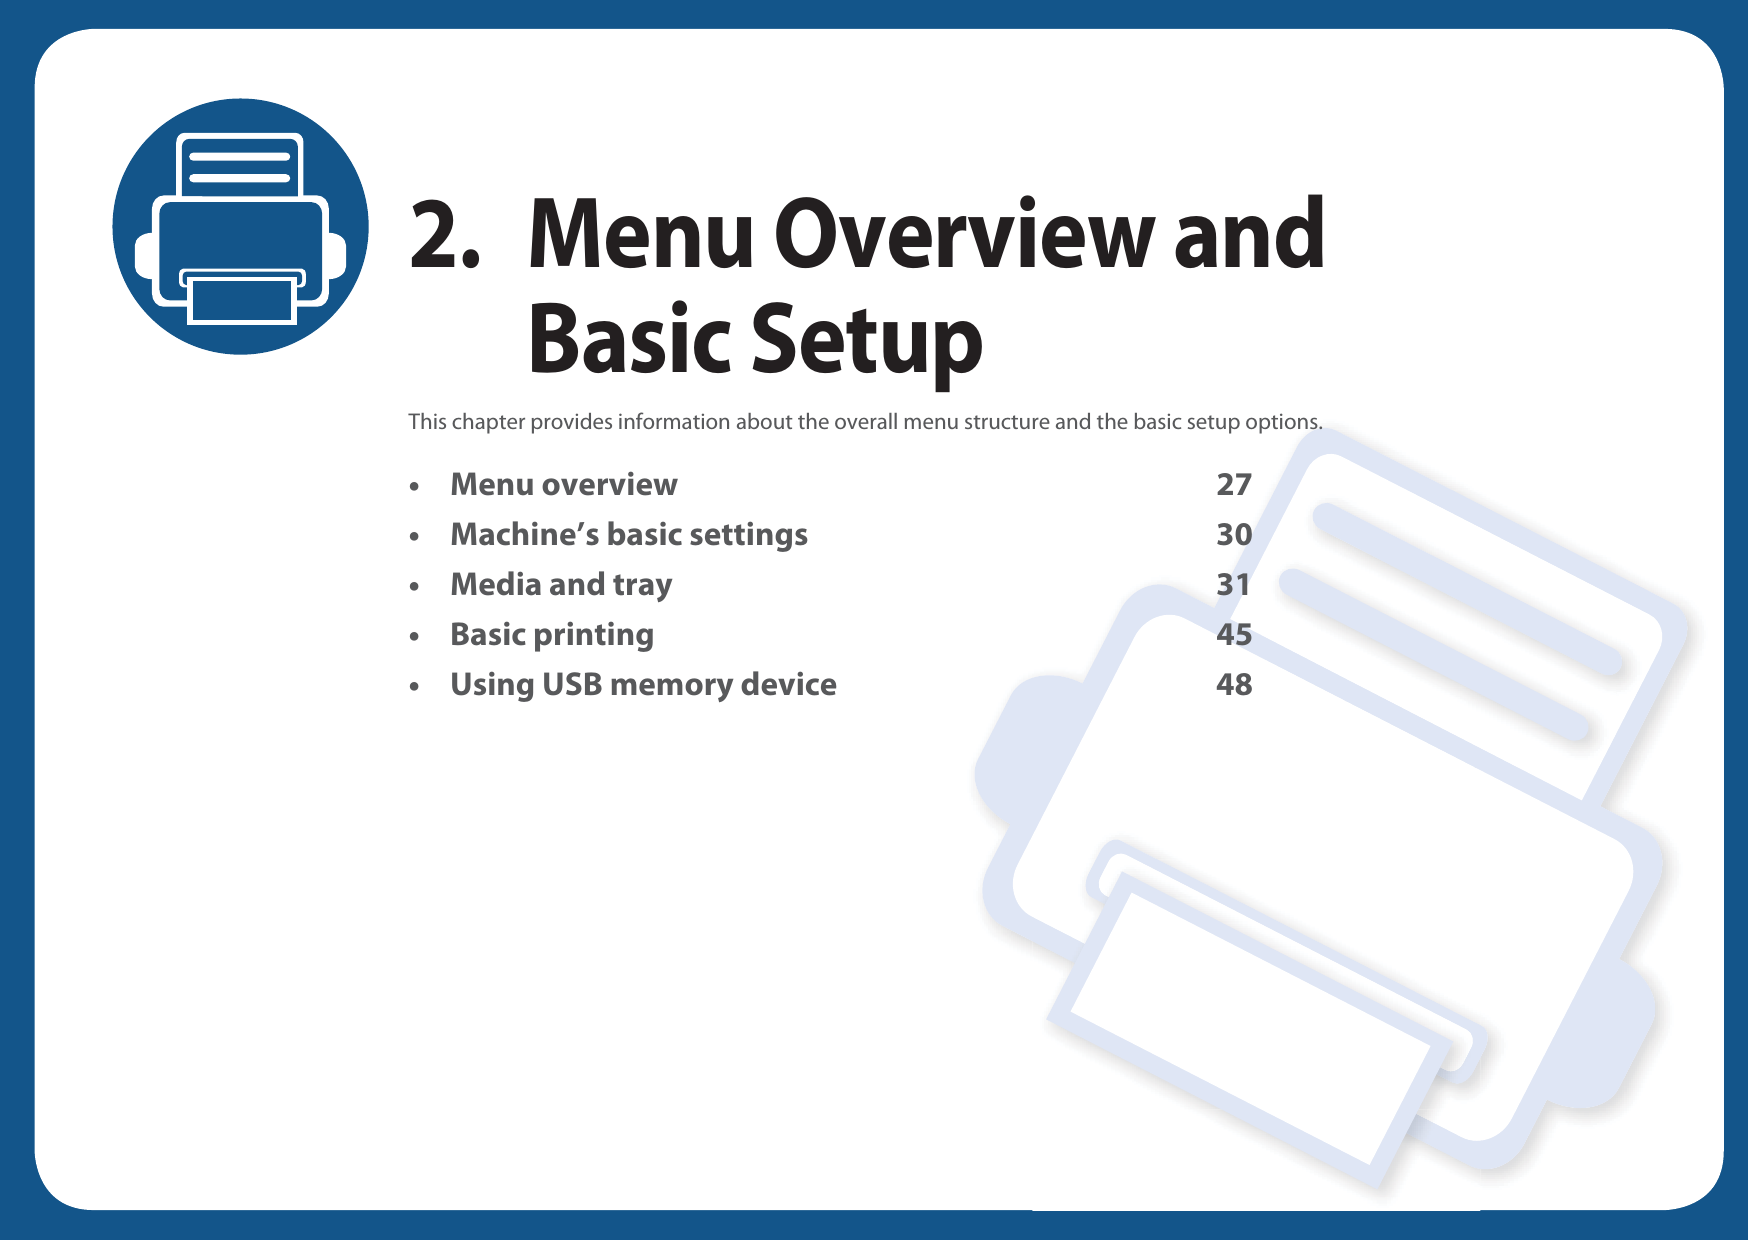 2. Menu Overview and Basic SetupThis chapter provides information about the overall menu structure and the basic setup options.• Menu overview 27• Machine’s basic settings 30• Media and tray 31• Basic printing 45• Using USB memory device 48